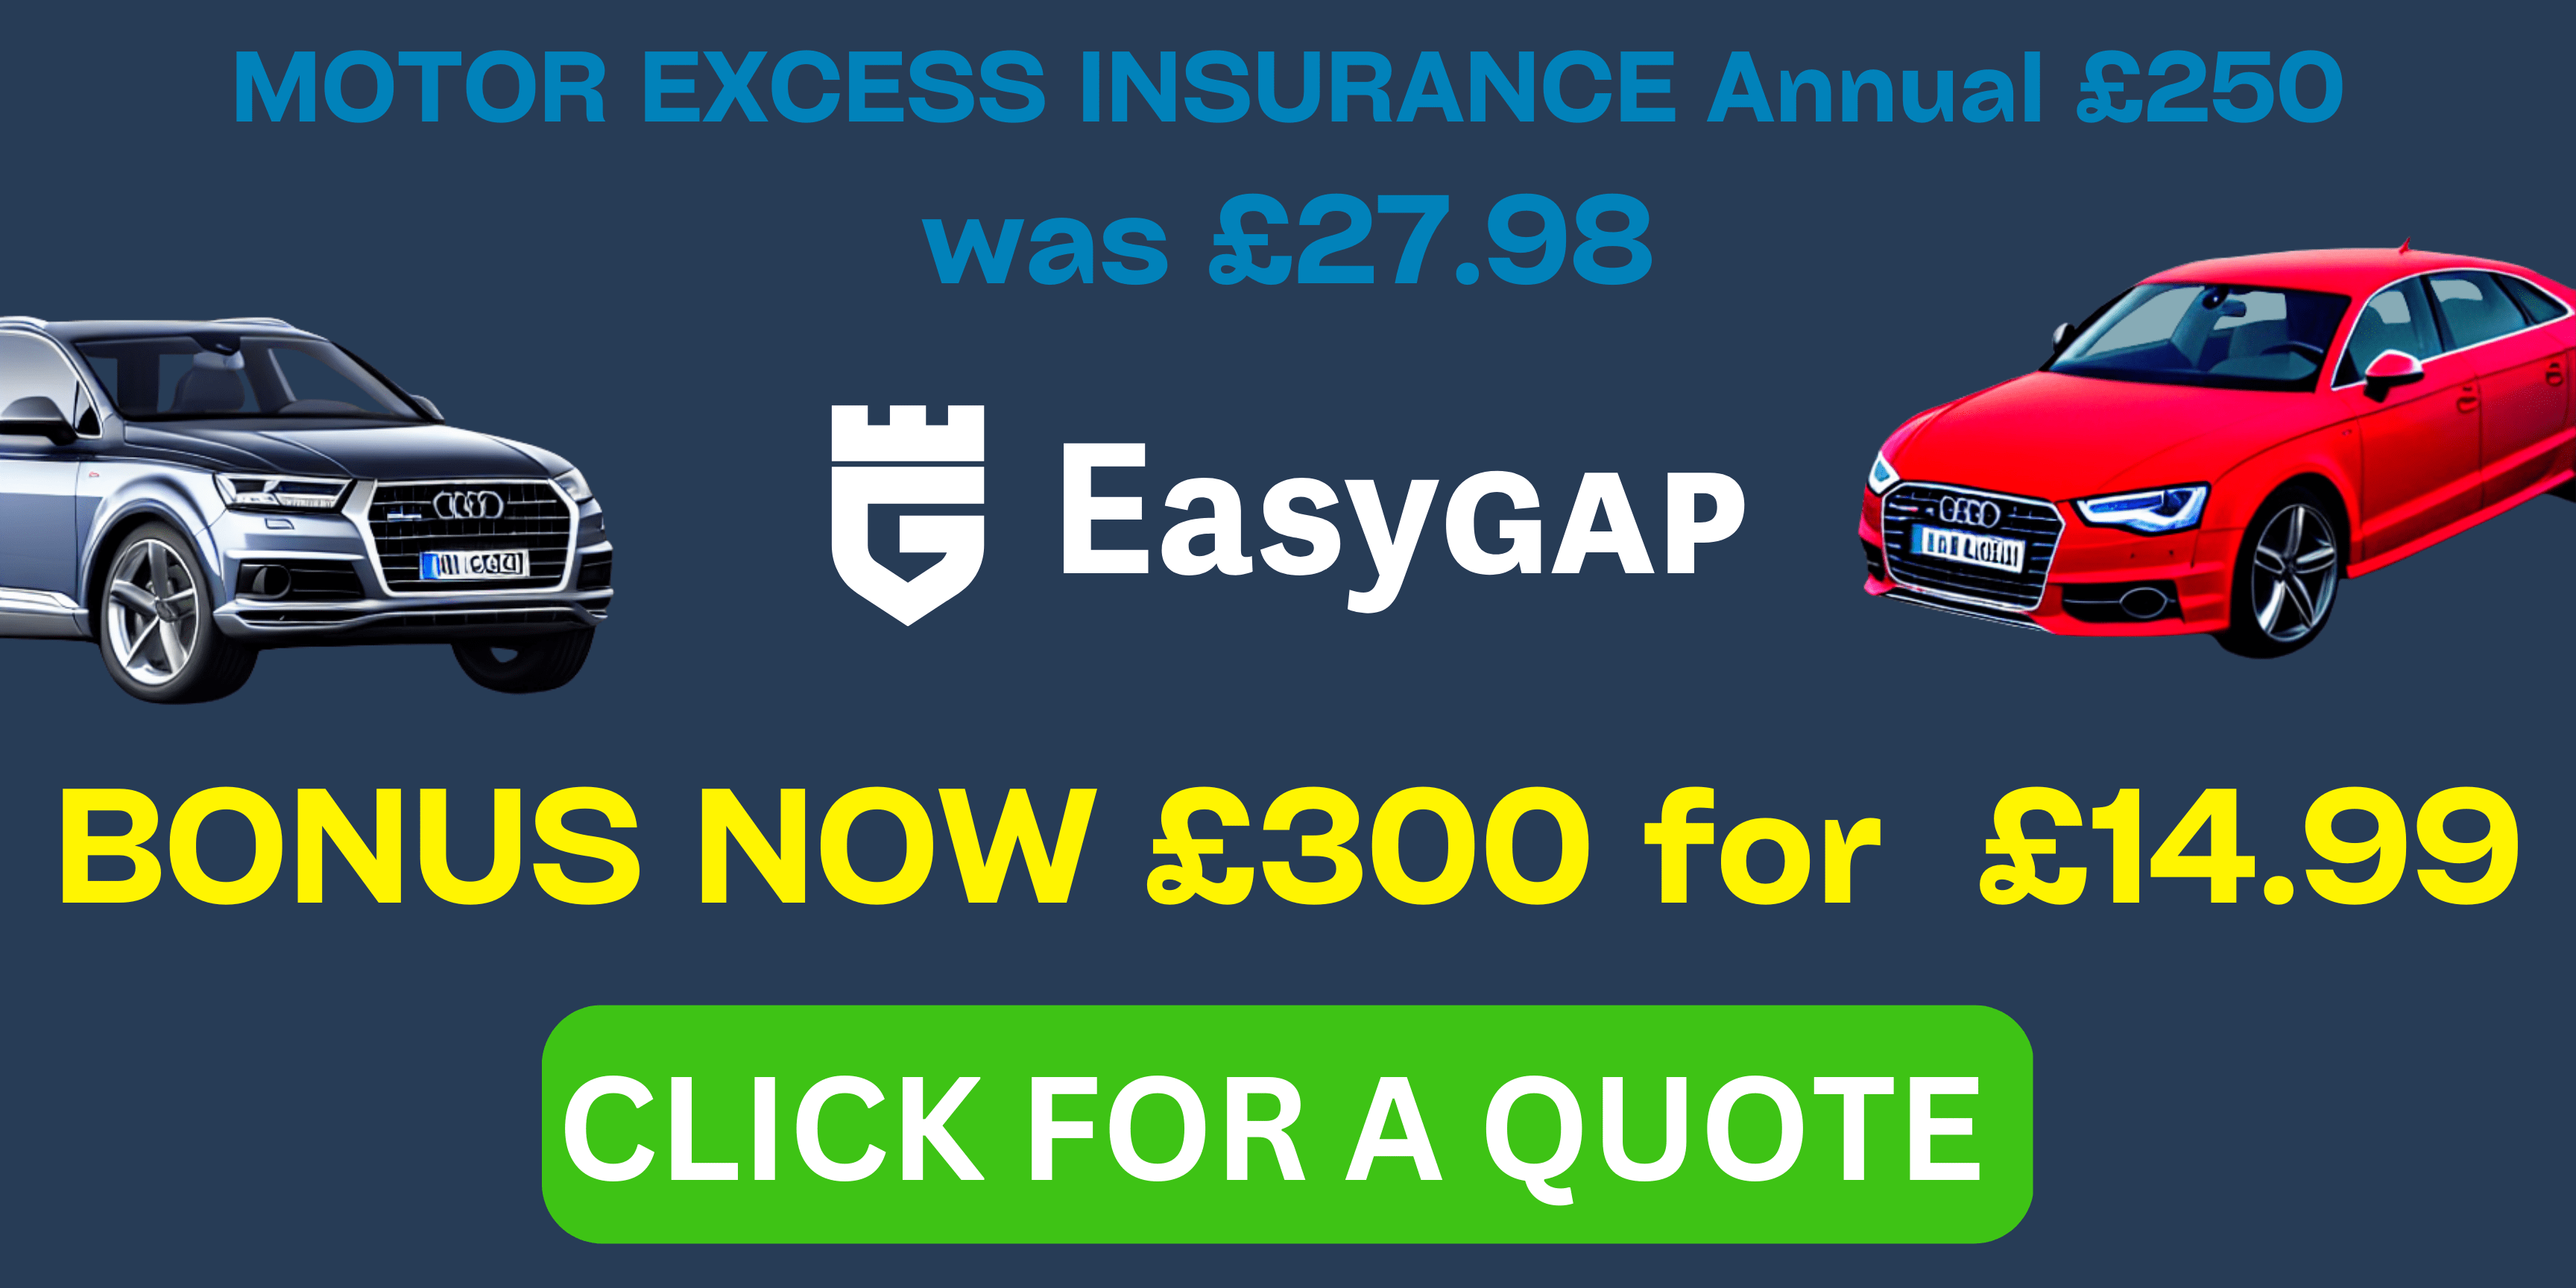 cheapest motor excess insurance £250